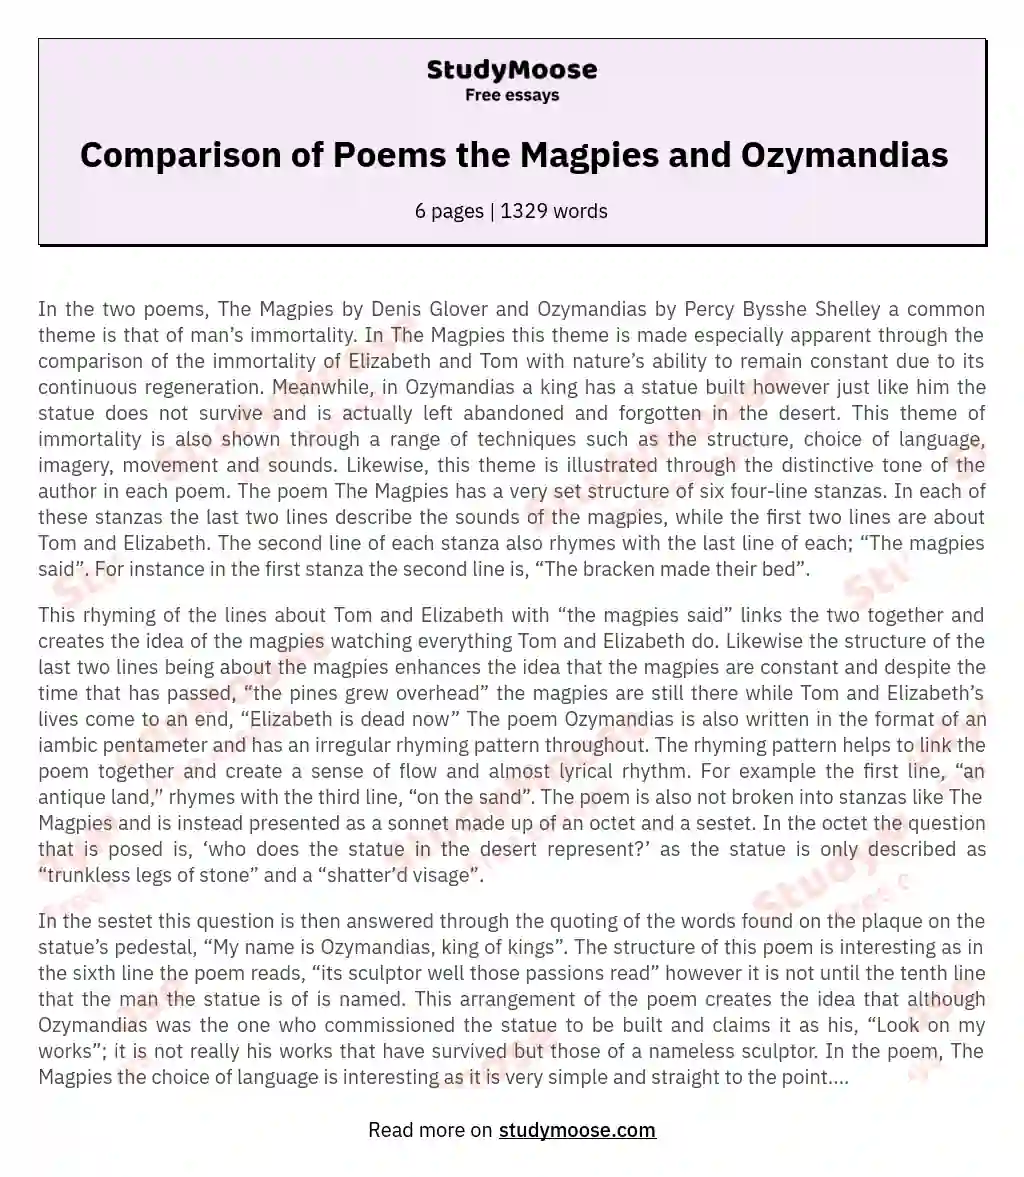 Themes of Immortality in The Magpies and Ozymandias essay